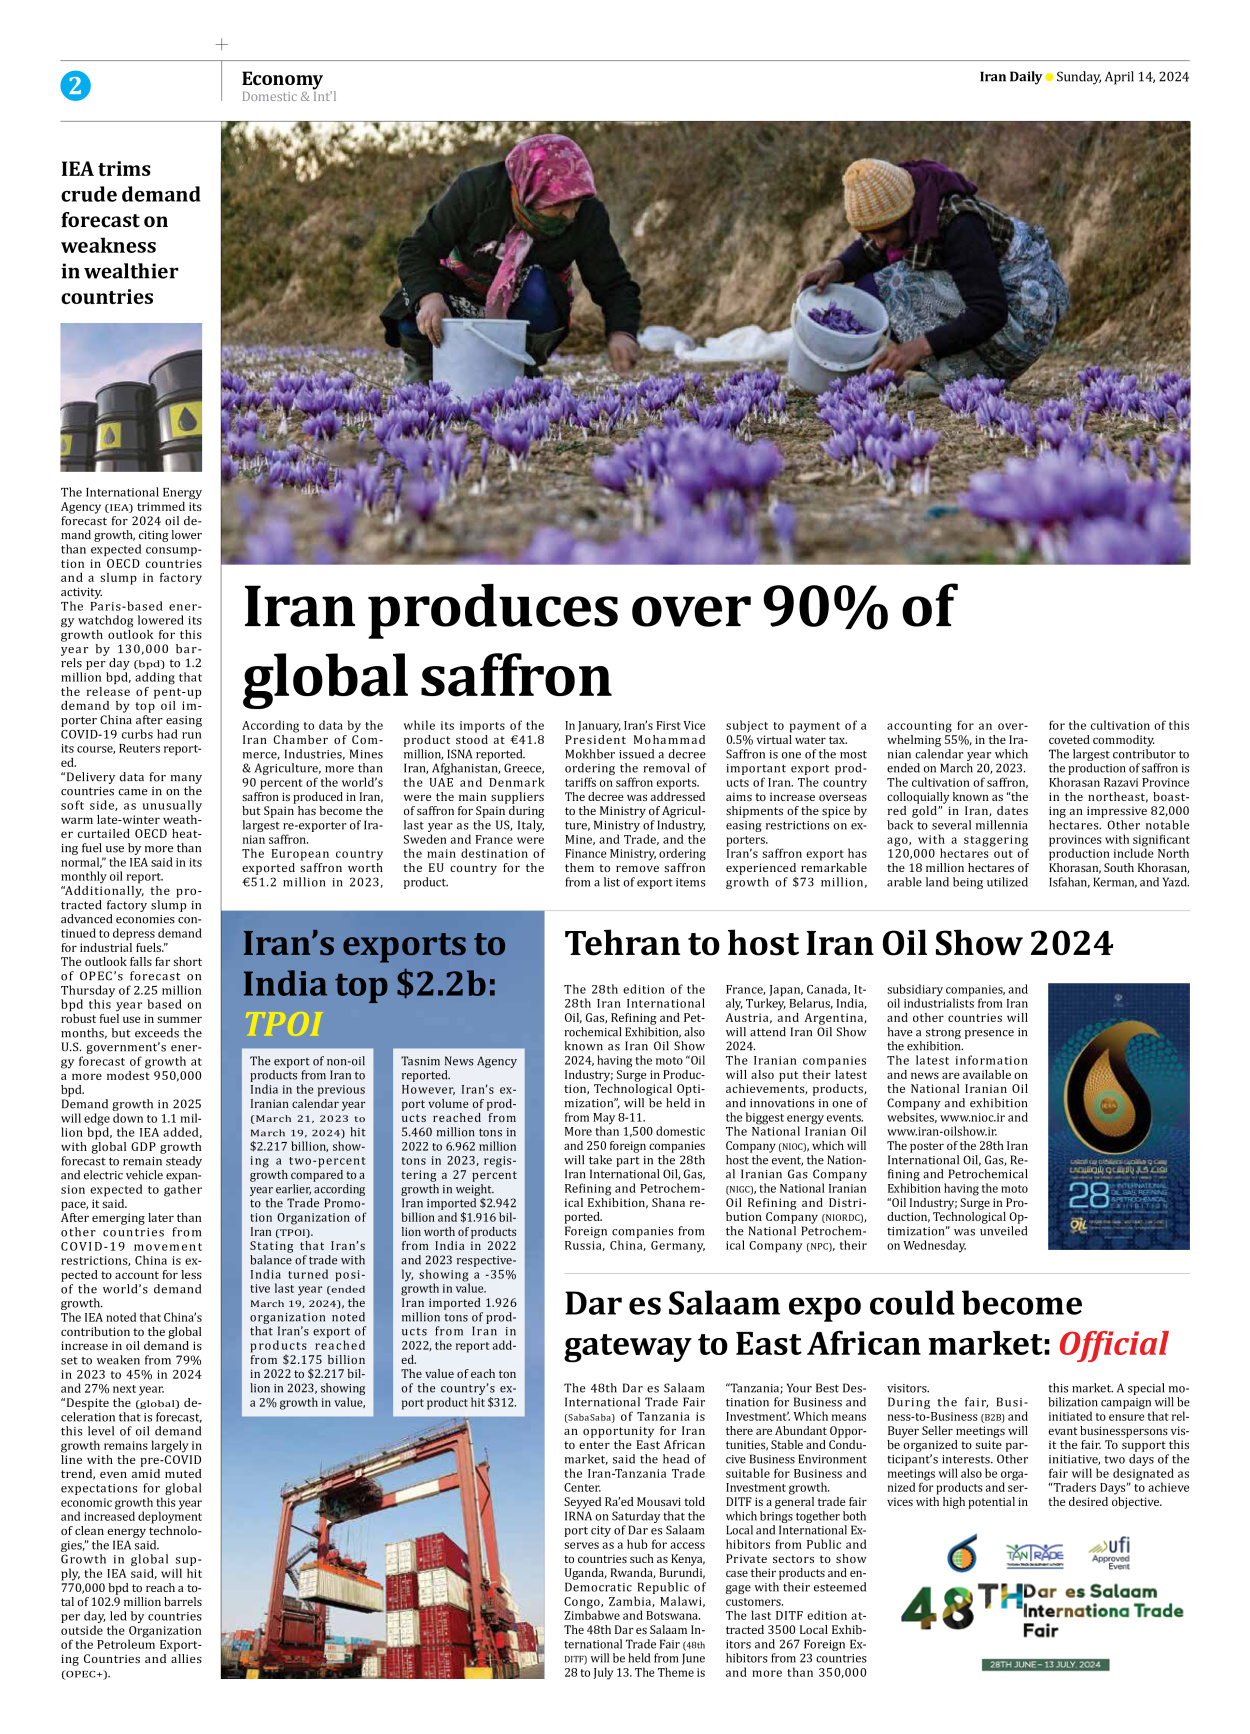 Iran Daily - Number Seven Thousand Five Hundred and Thirty Two - 14 April 2024 - Page 2